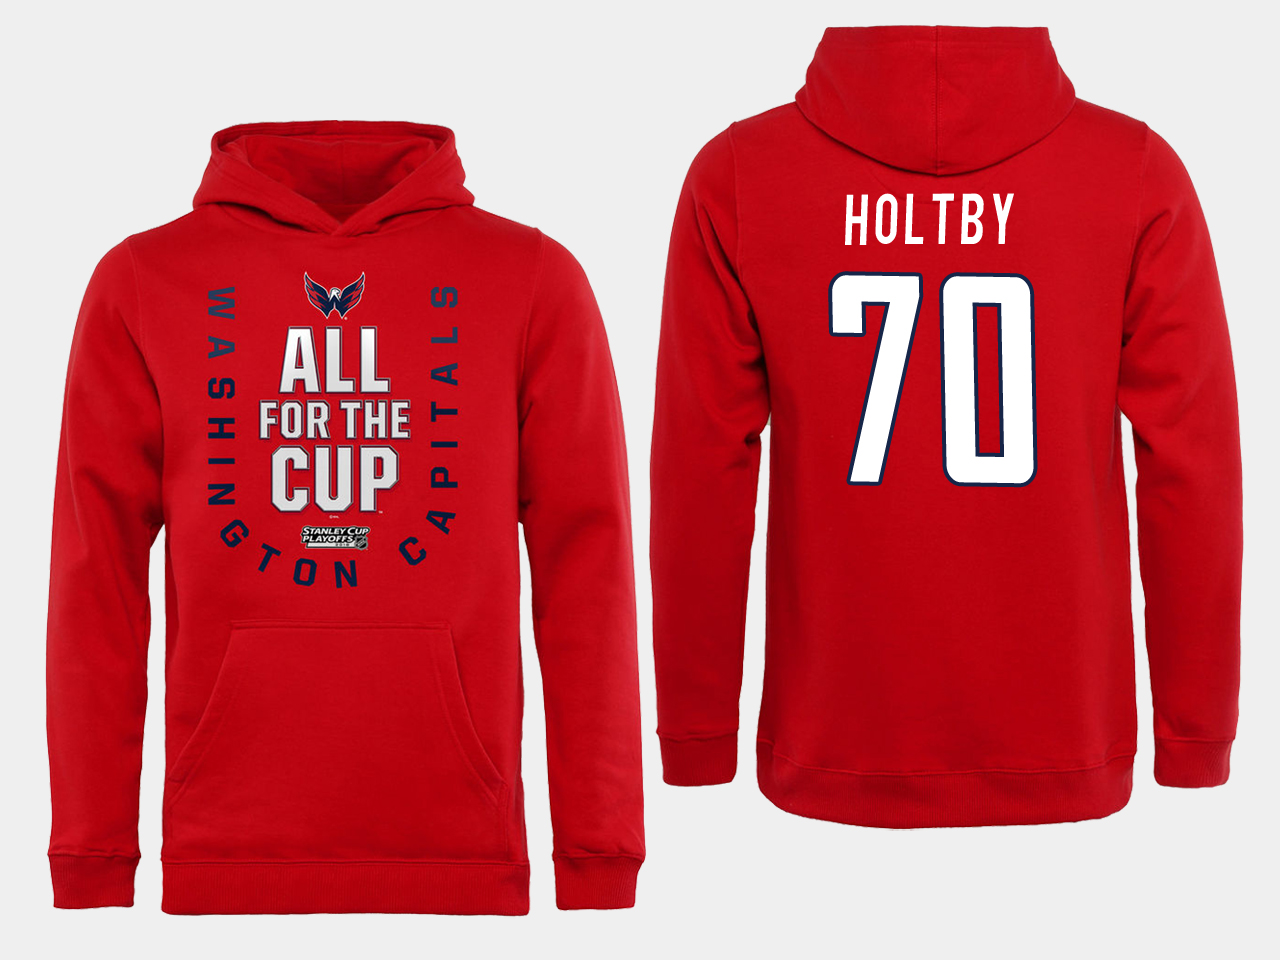 Men NHL Washington Capitals #70 Holtby Red All for the Cup Hoodie->washington capitals->NHL Jersey